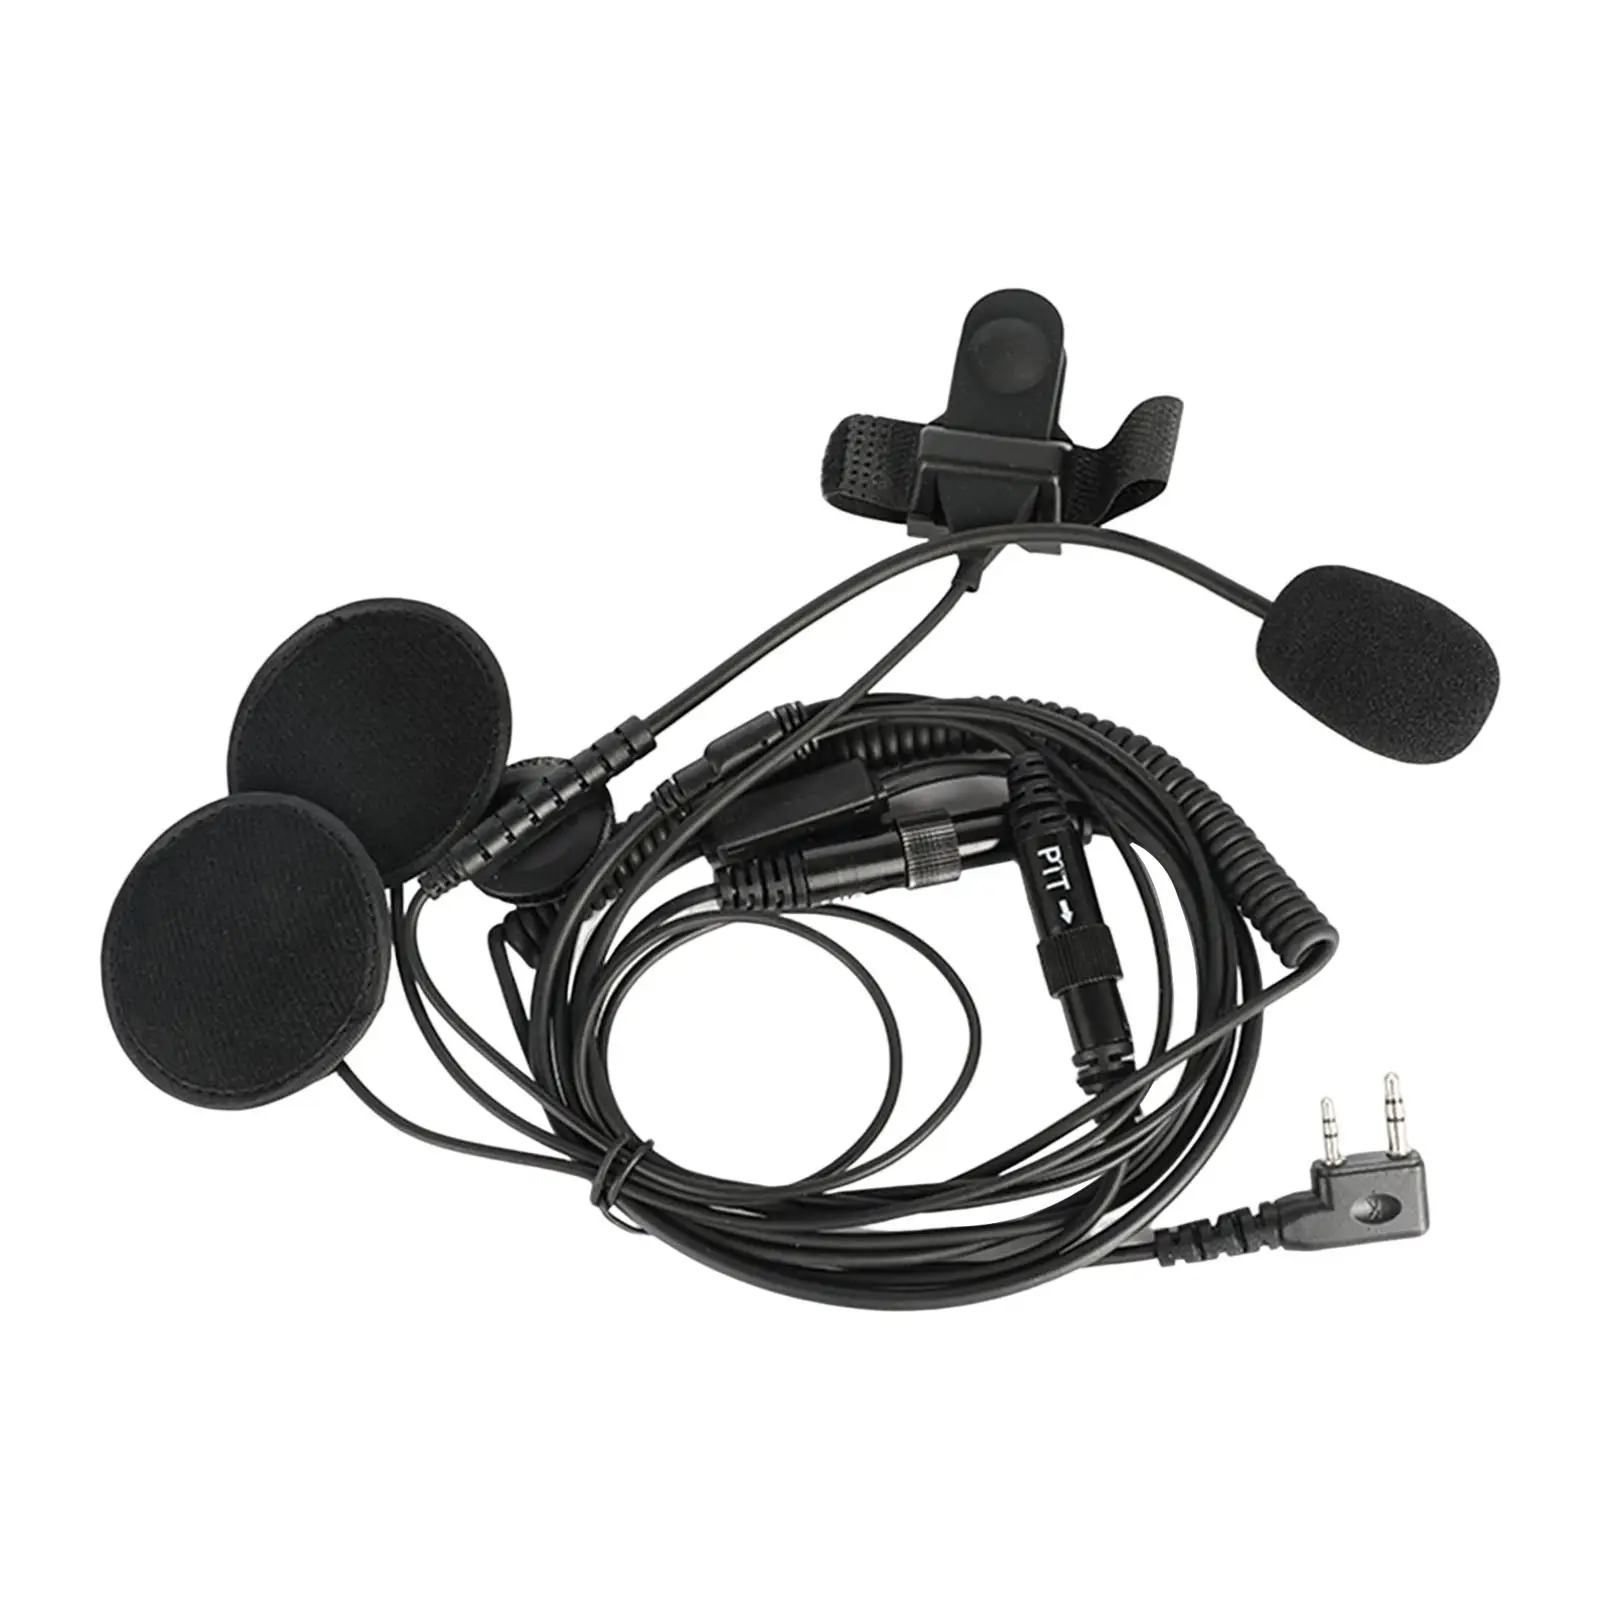 Two Way Radio Walkie Talkie Headset Earpiece with PTT Mic Motorcycle Cap Headset for Riding Motorbike